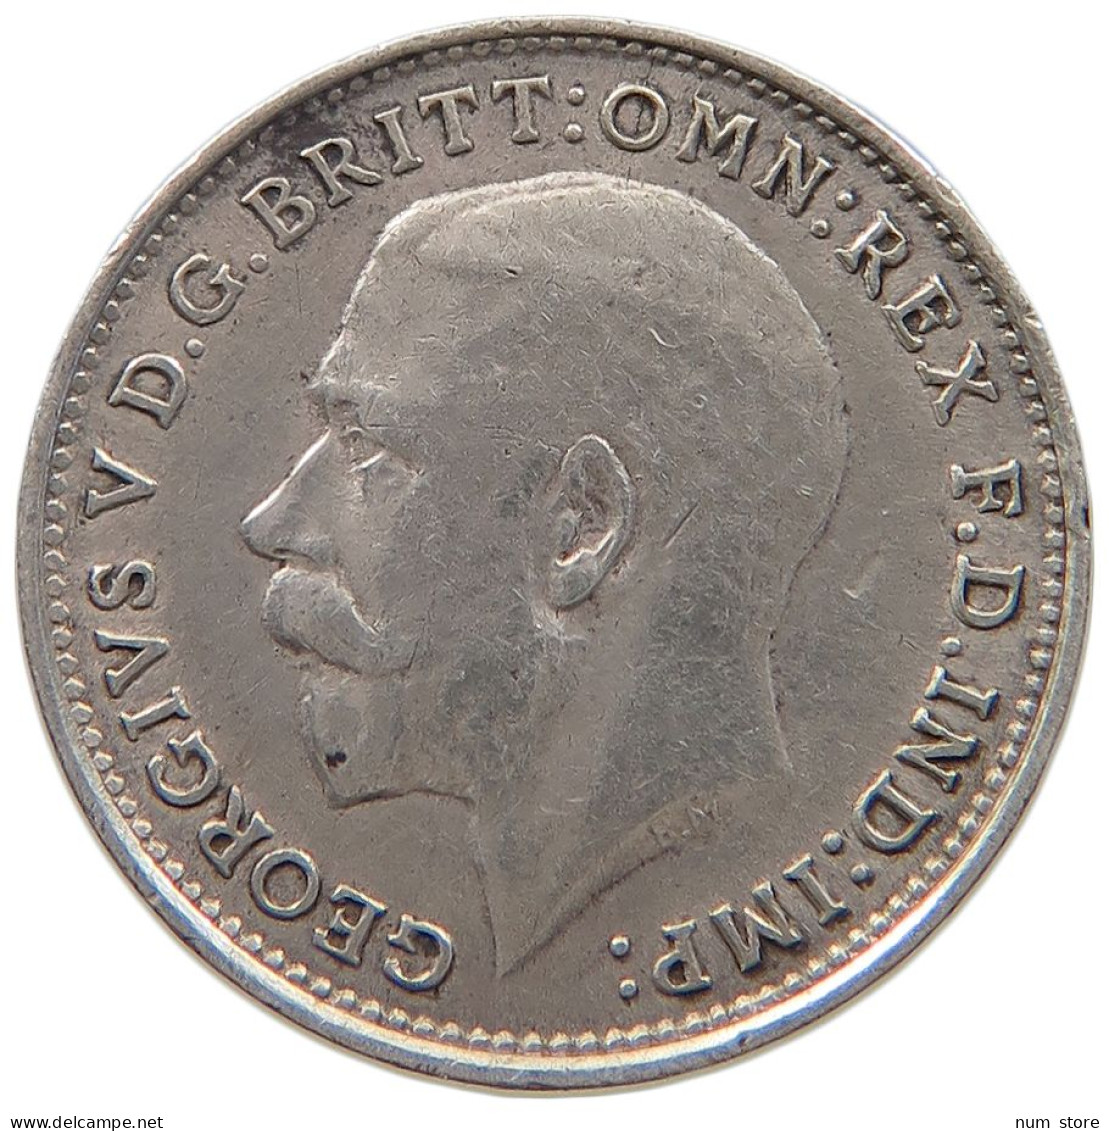 GREAT BRITAIN THREEPENCE 1915 George V. (1910-1936) #a044 0365 - F. 3 Pence